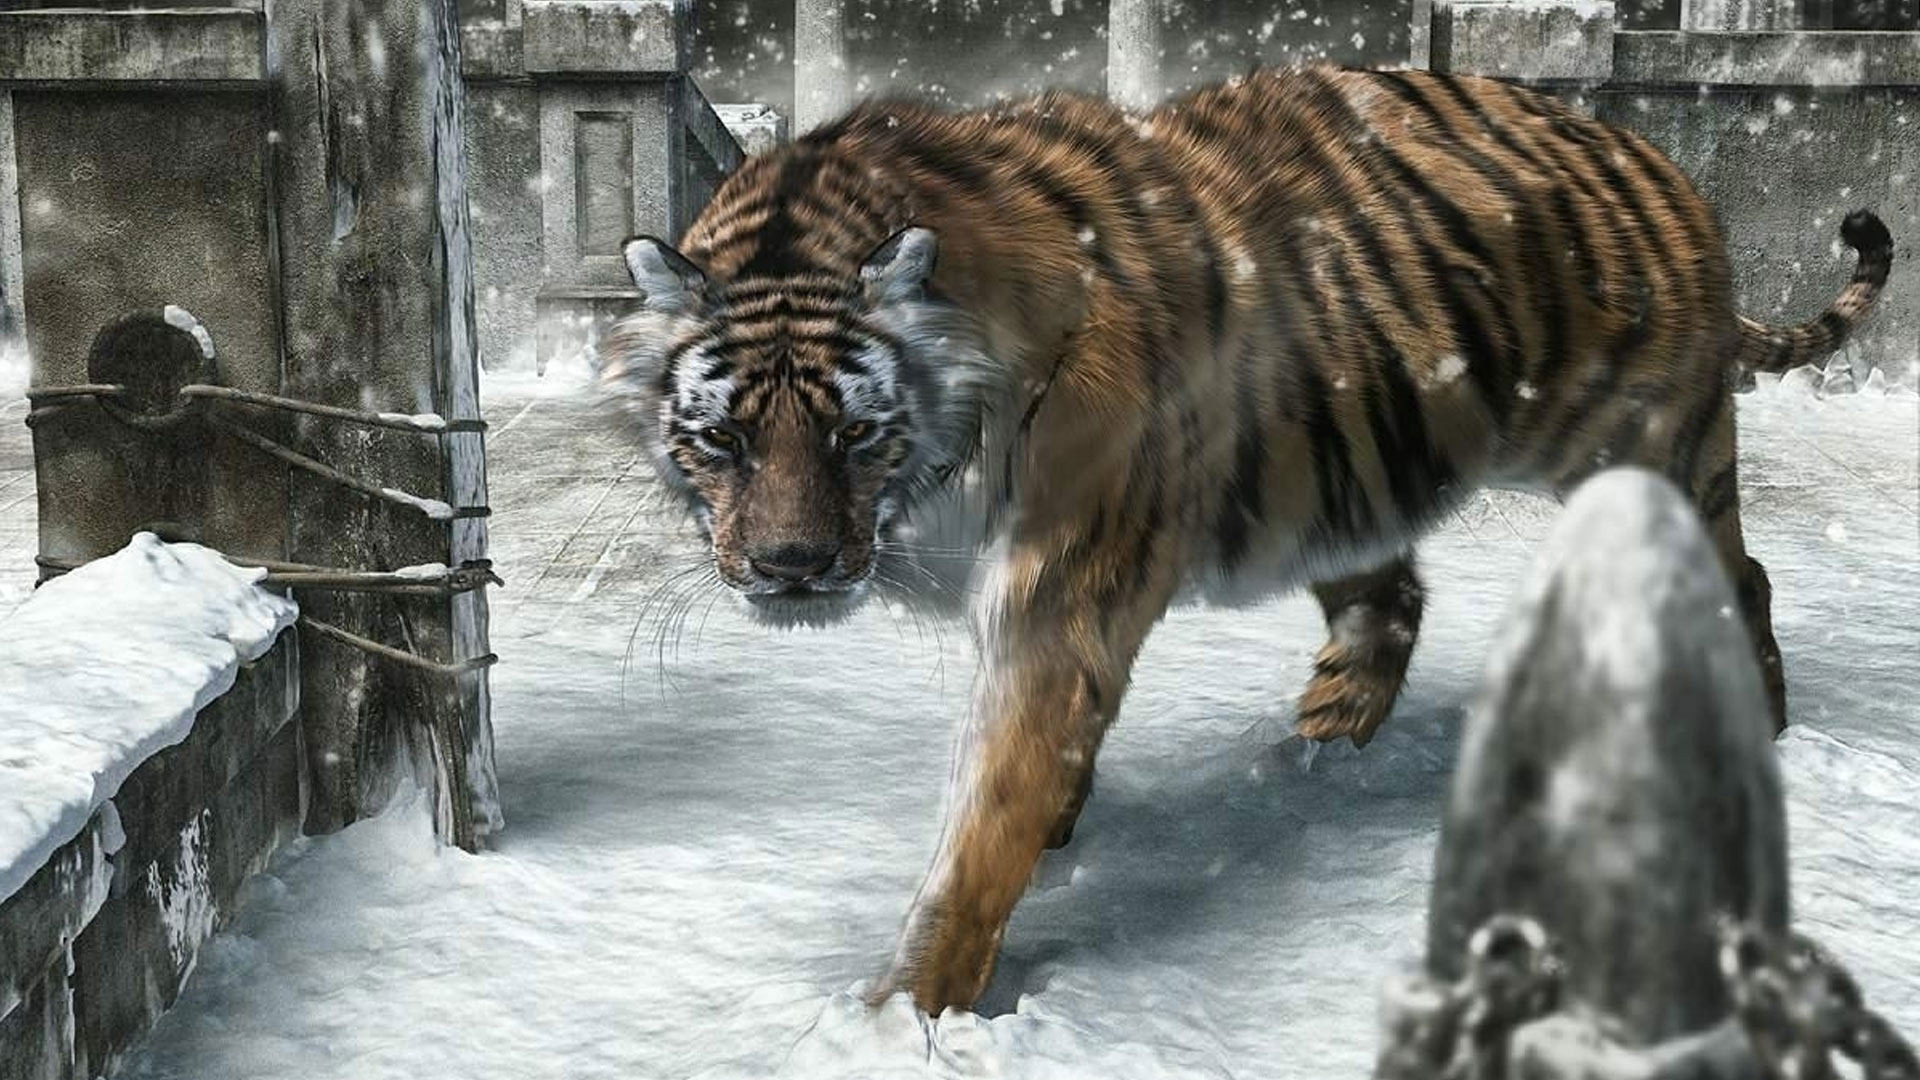 Tiger In The Snow Wallpaper